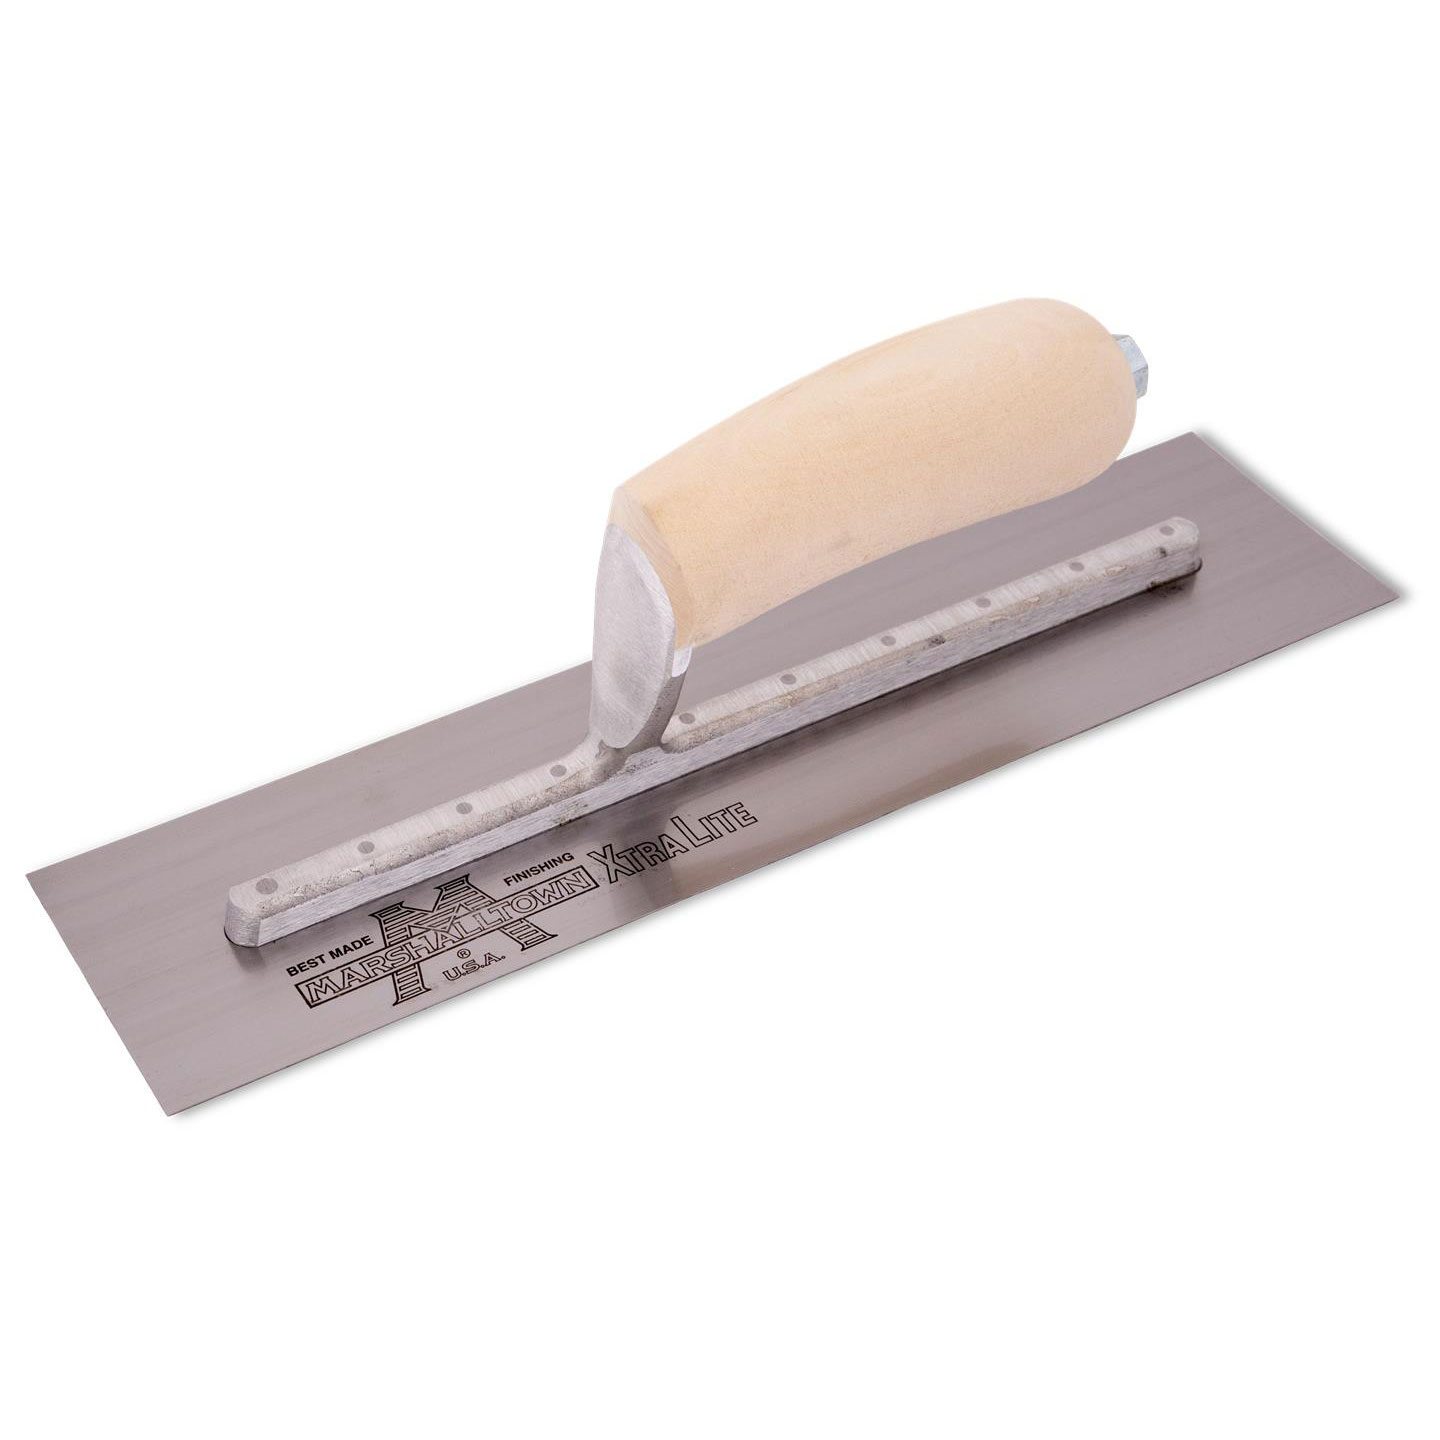 Marshalltown MXS7 12in X 5in Finishing Trowel with Curved Wood Handle Finishing Trowel-Curved Handle MAT-MXS7